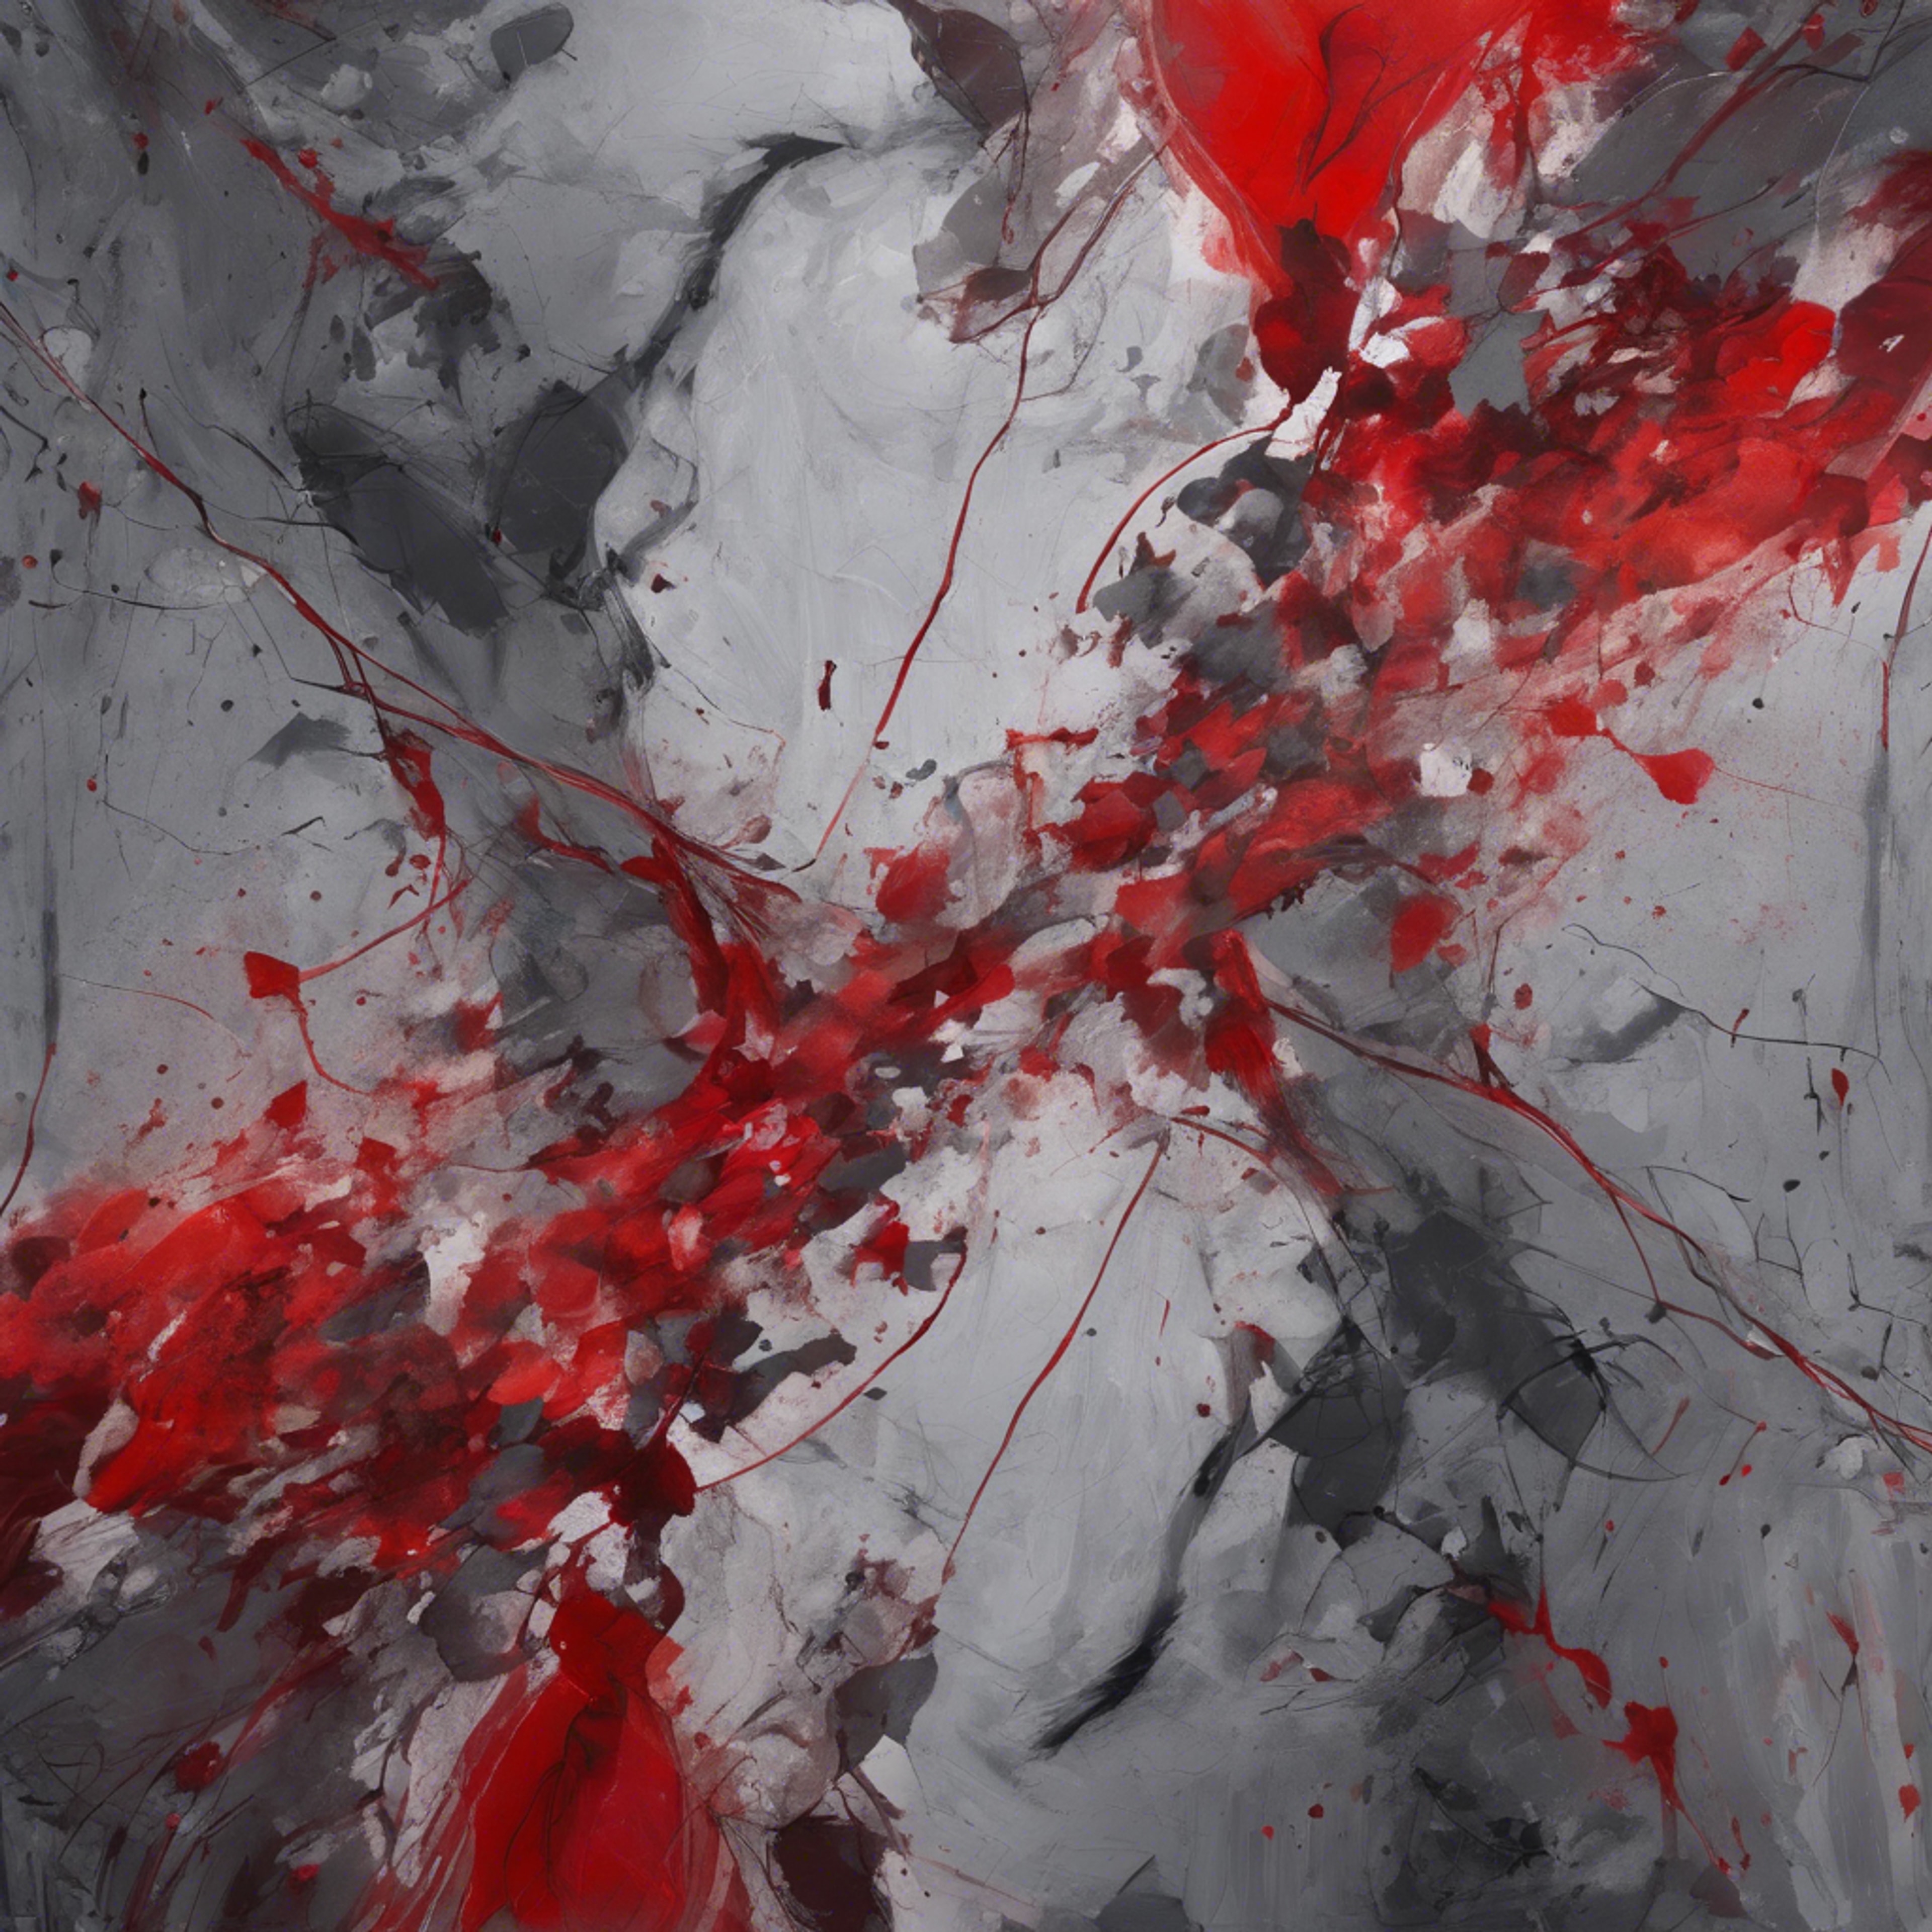 A red and gray abstract painting demonstrating the battle between passion and reason. Wallpaper[fb490a5db02d428289d0]